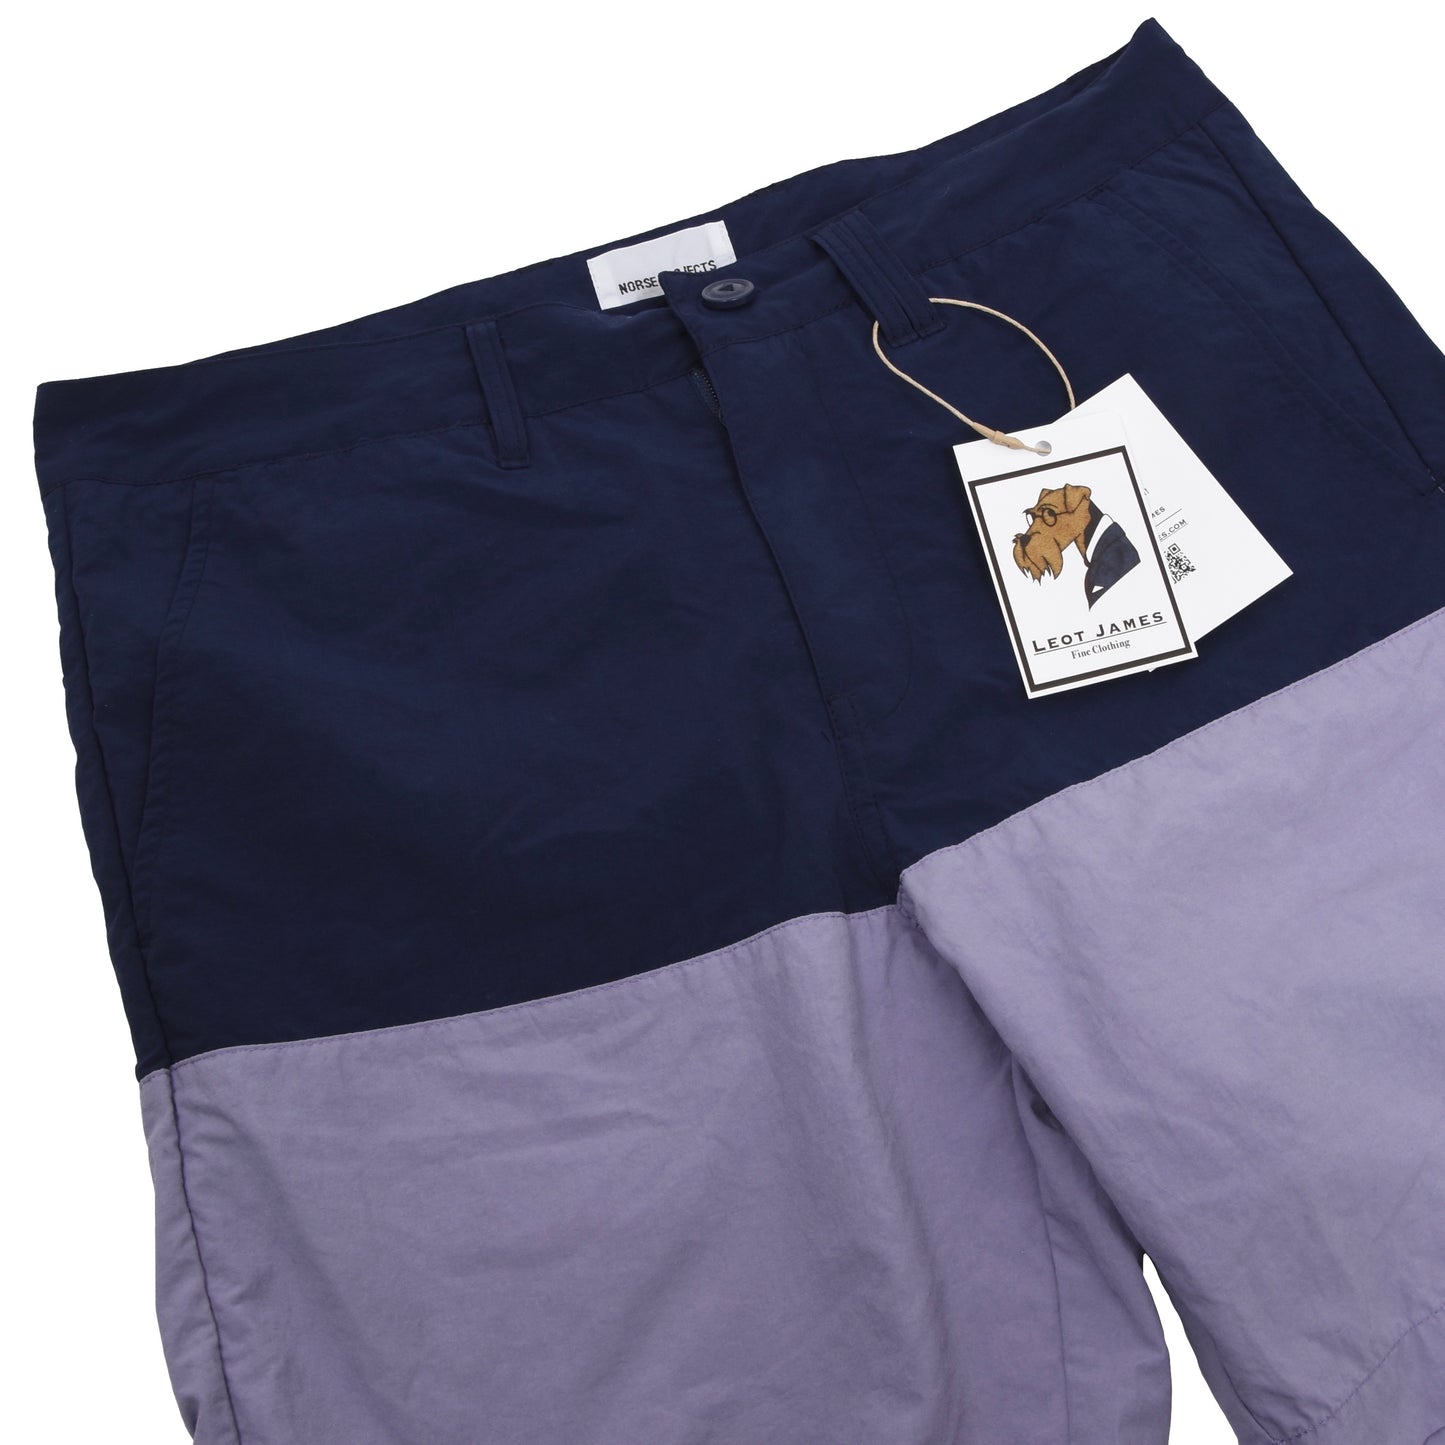 Norse Projects Swim Shorts/Trunks Size Small - Navy Blue/Lavender